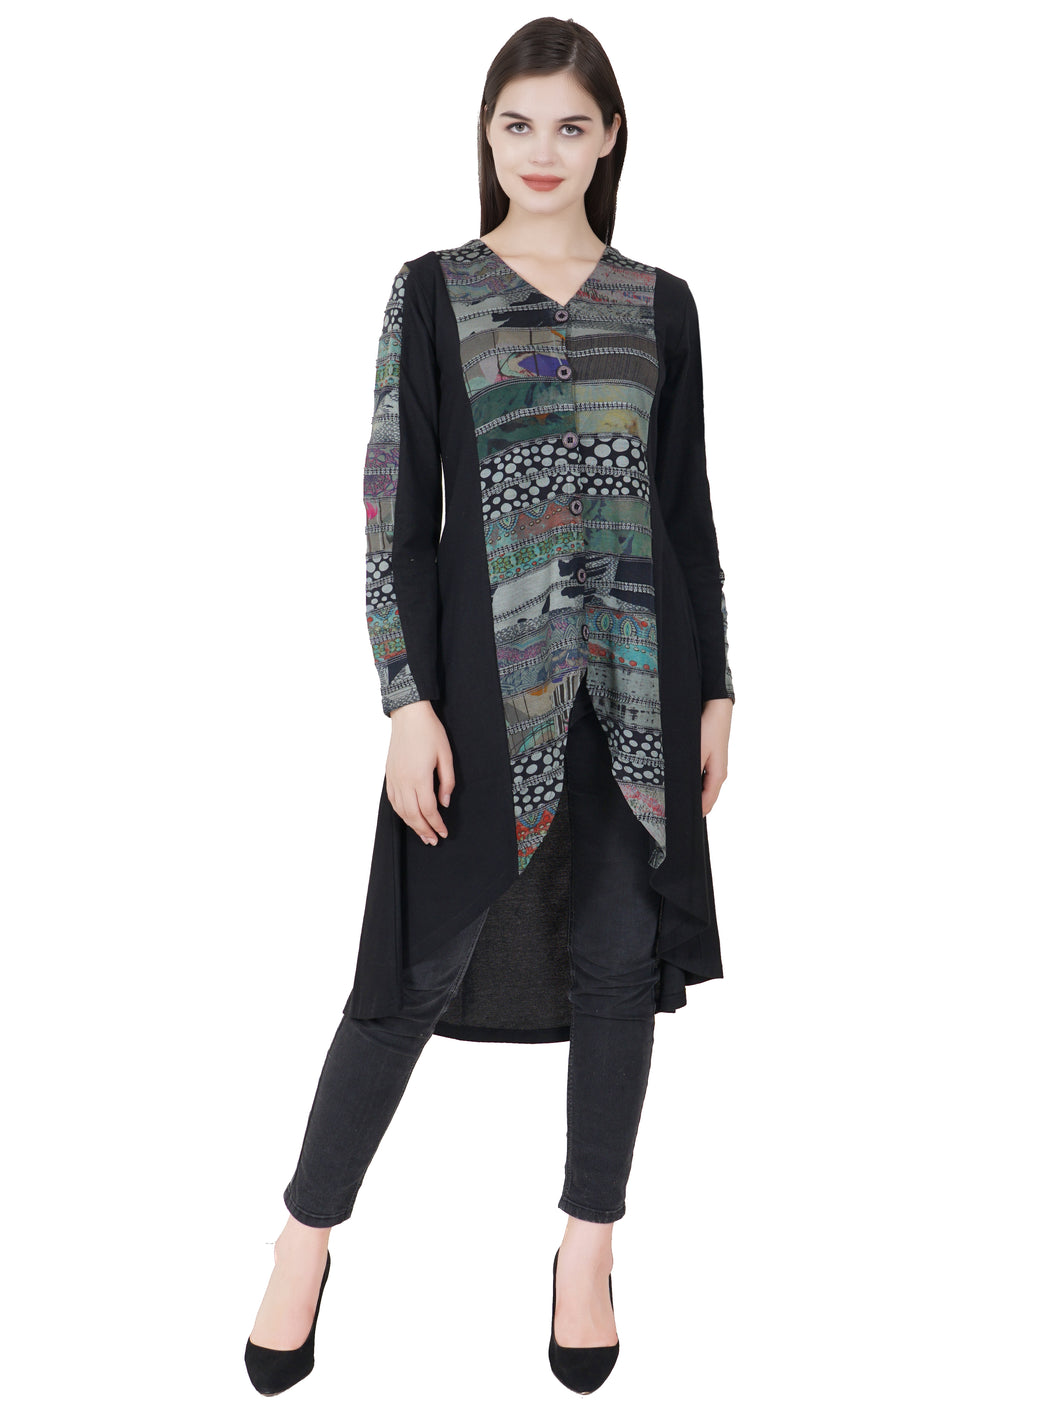 Jacket/Tunic by Parsley and Sage (available in plus sizes)